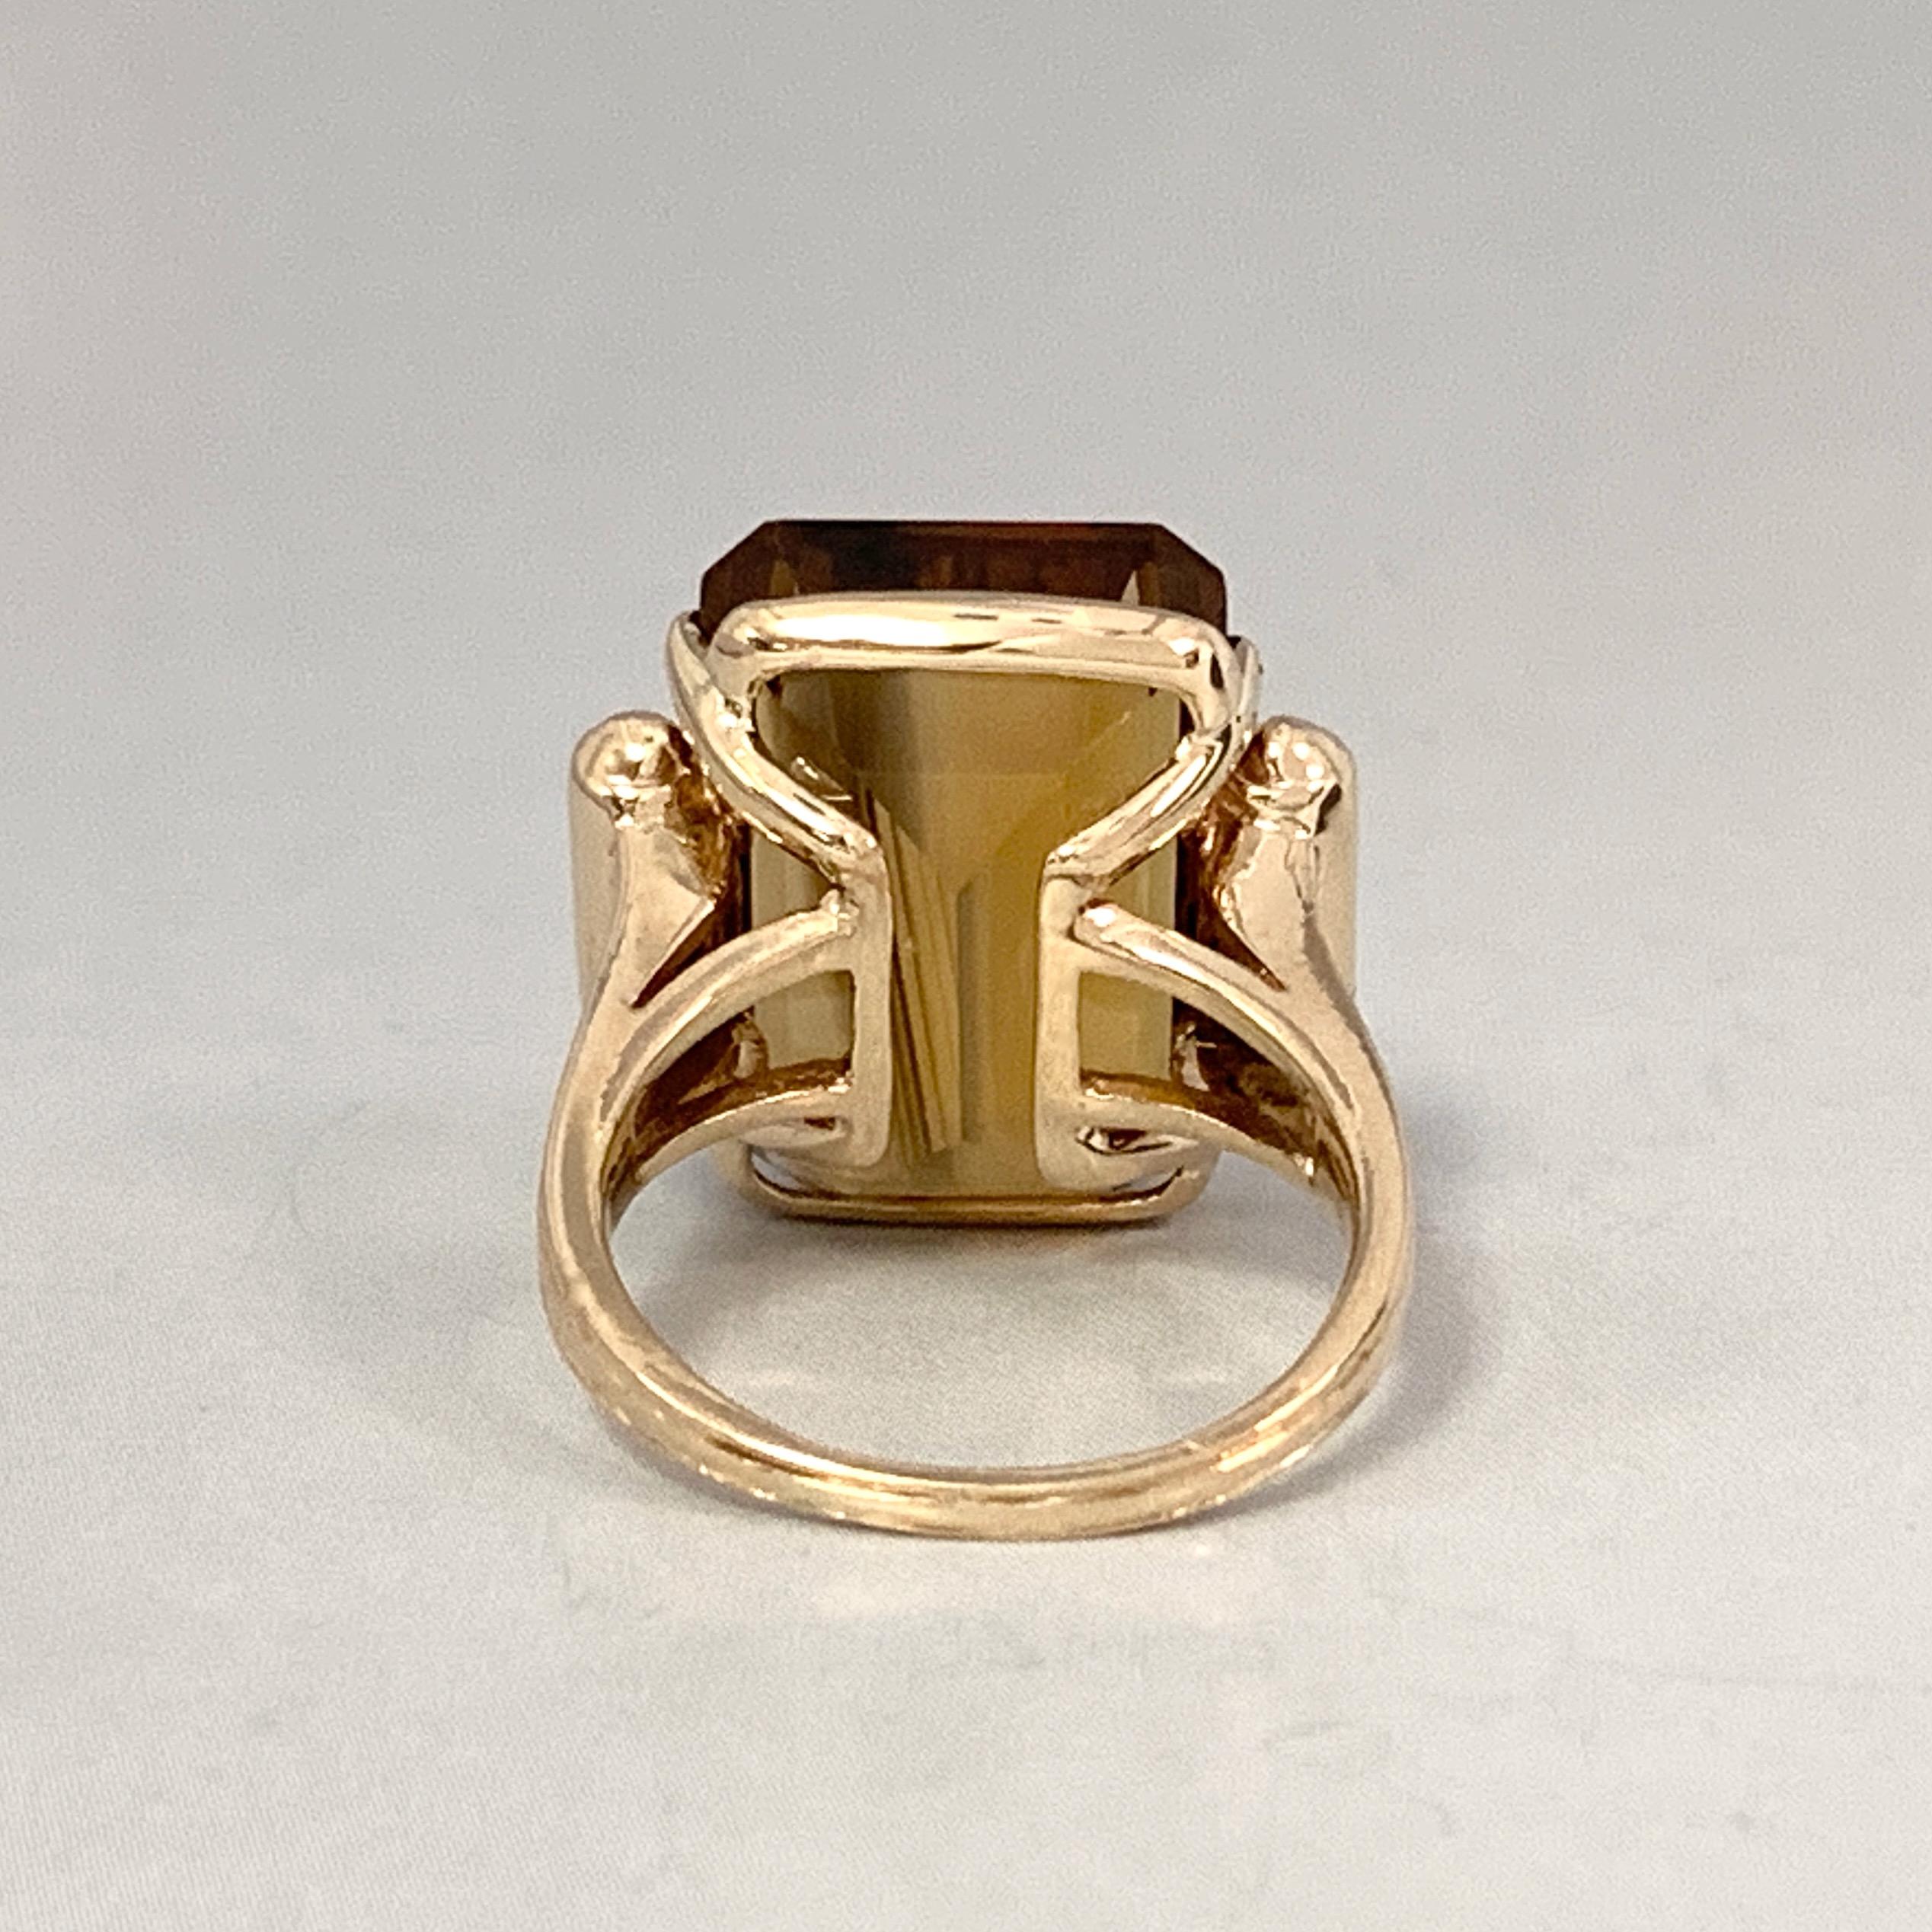 18 Carat Honey-Colored Smoky Quartz Cocktail Ring in Yellow Gold Circa 1970 2